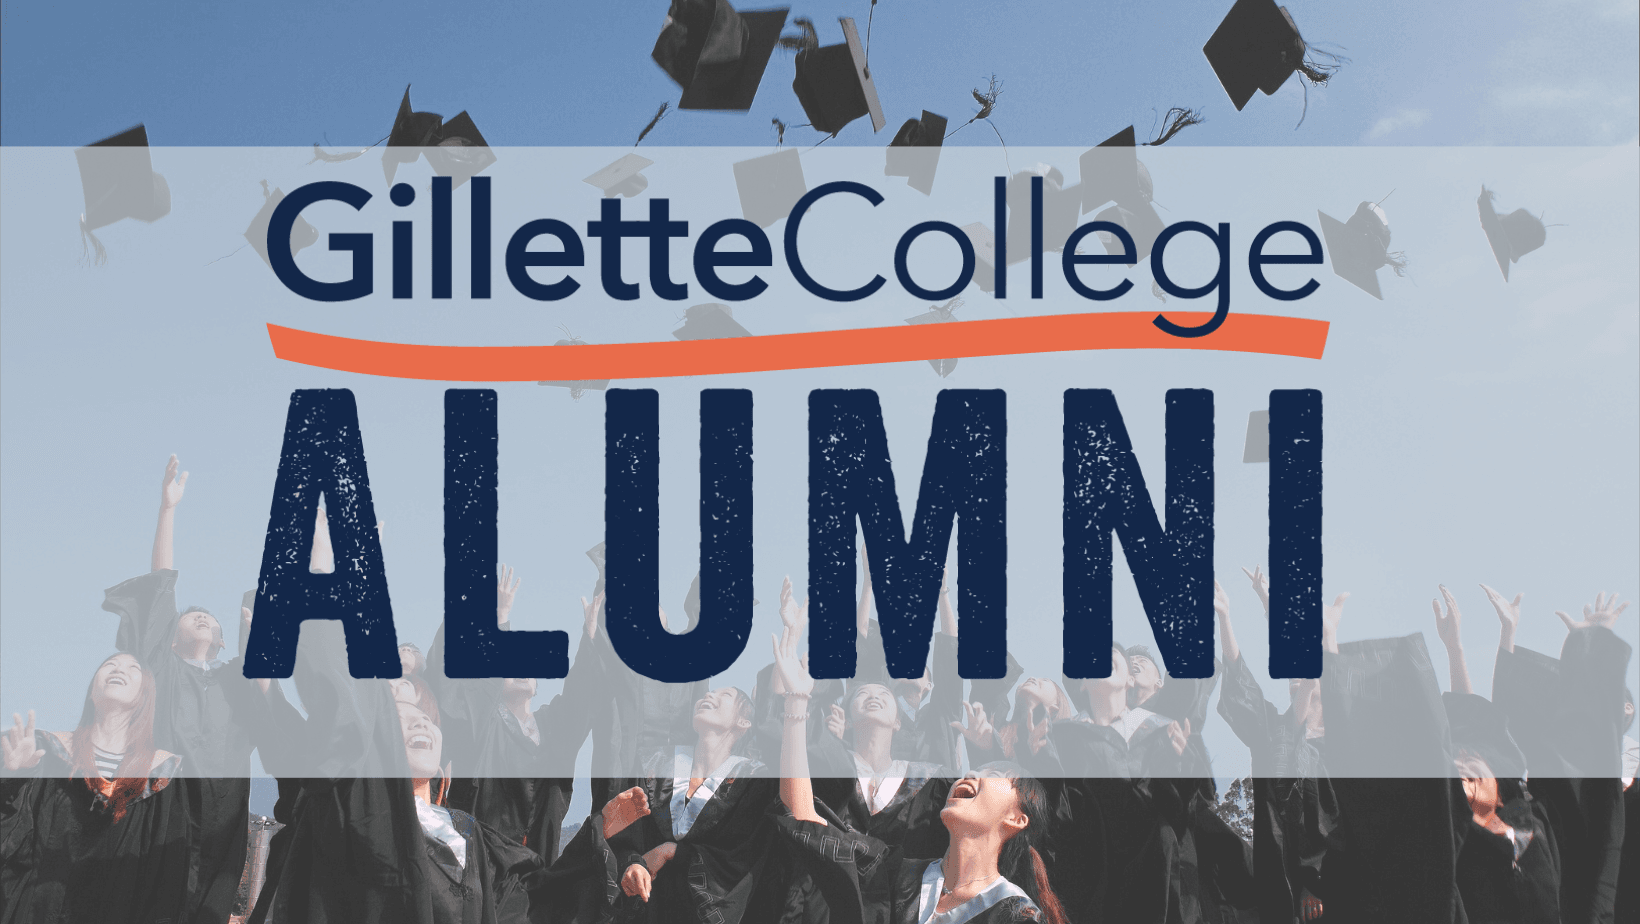 Are you Gillette College Alum? Join the Alumni Association today!